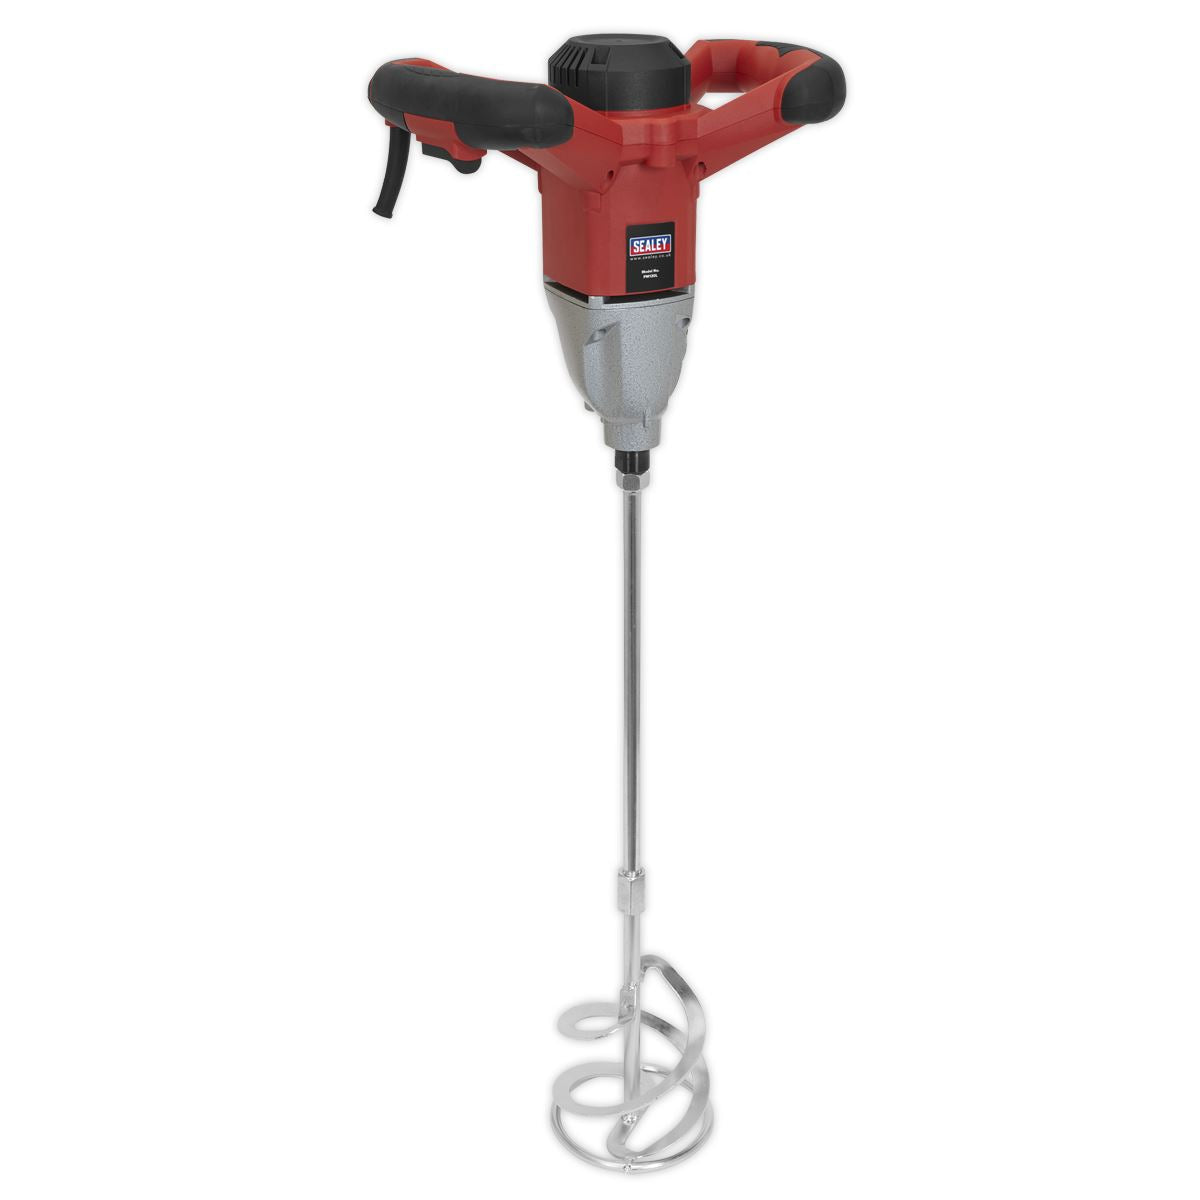 Sealey Electric Paddle Mixer 120L 1400W/230V